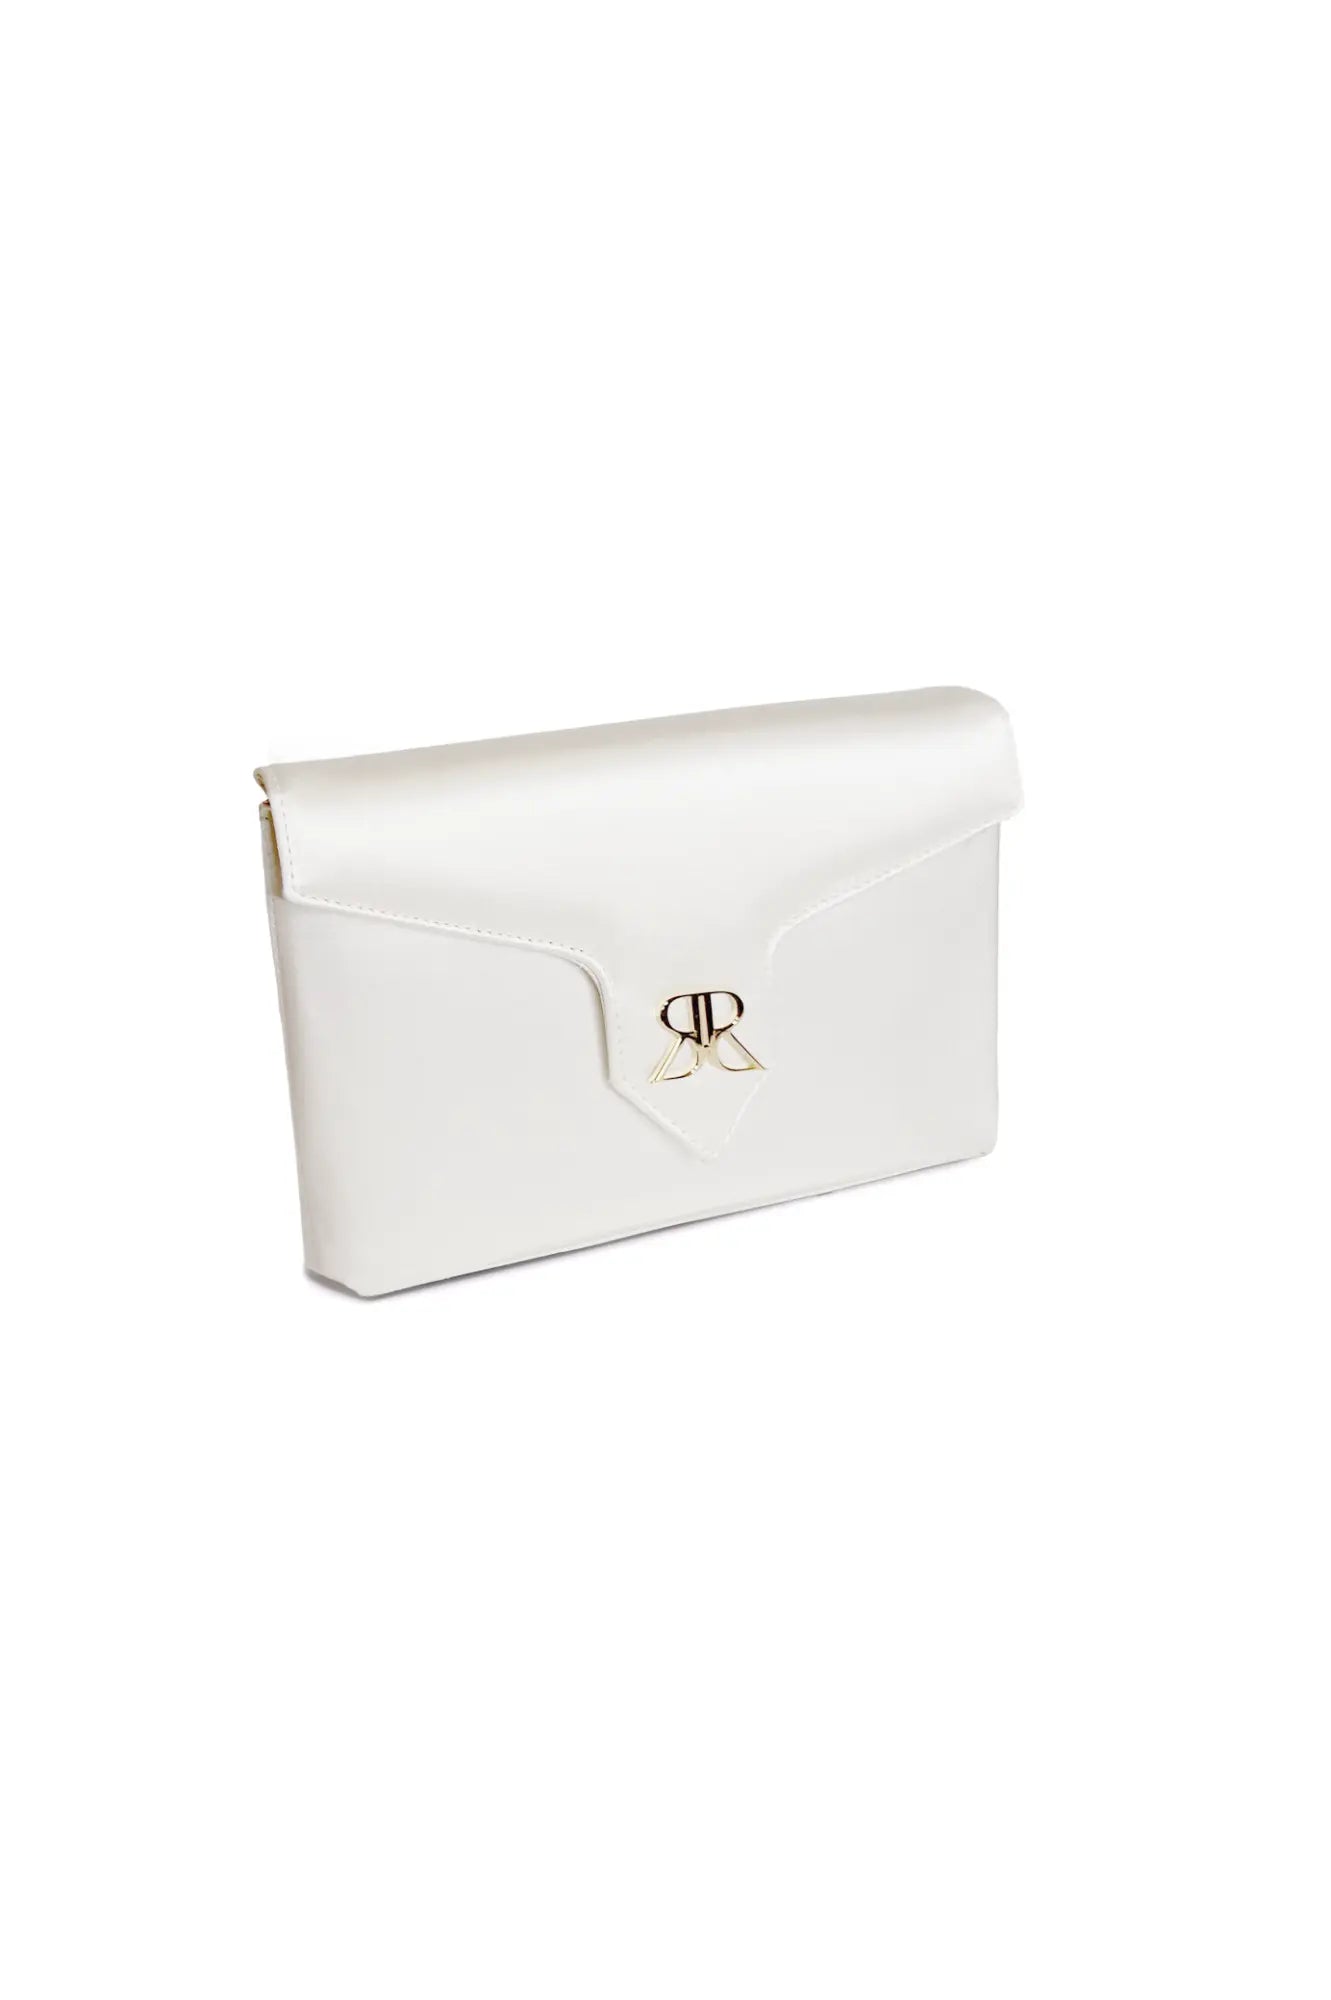 Love Note Envelope Clutch Ivory by The Bella Rosa Collection with a gold-tone metal clasp on a white background.